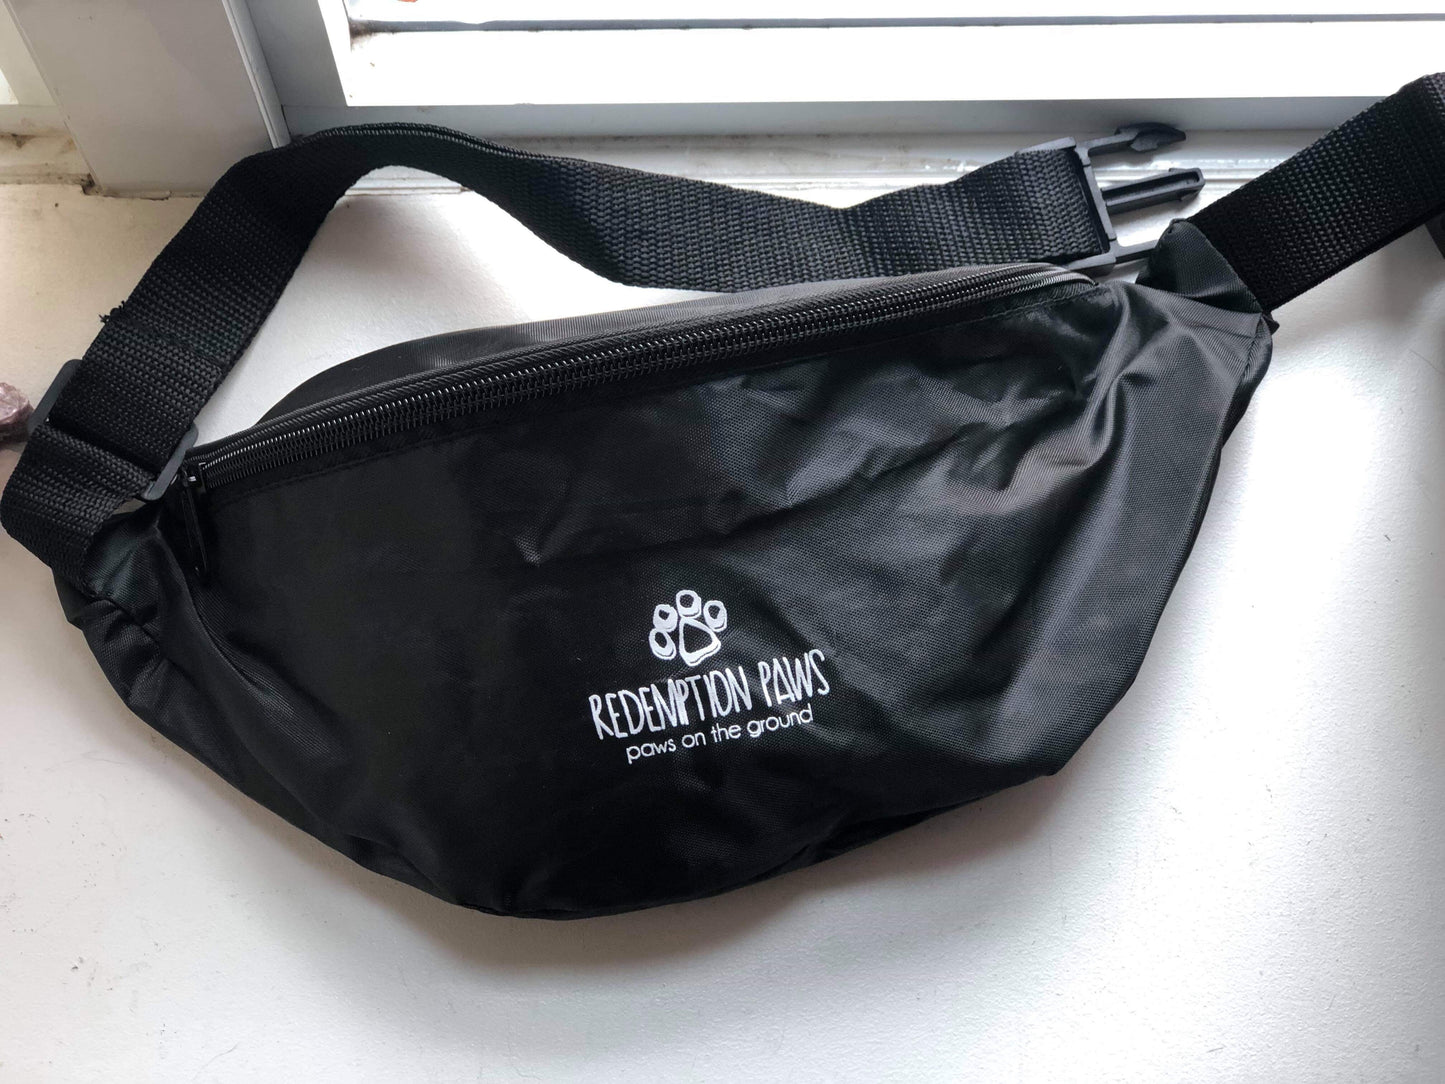 Redemption Paws Logo Fanny Pack